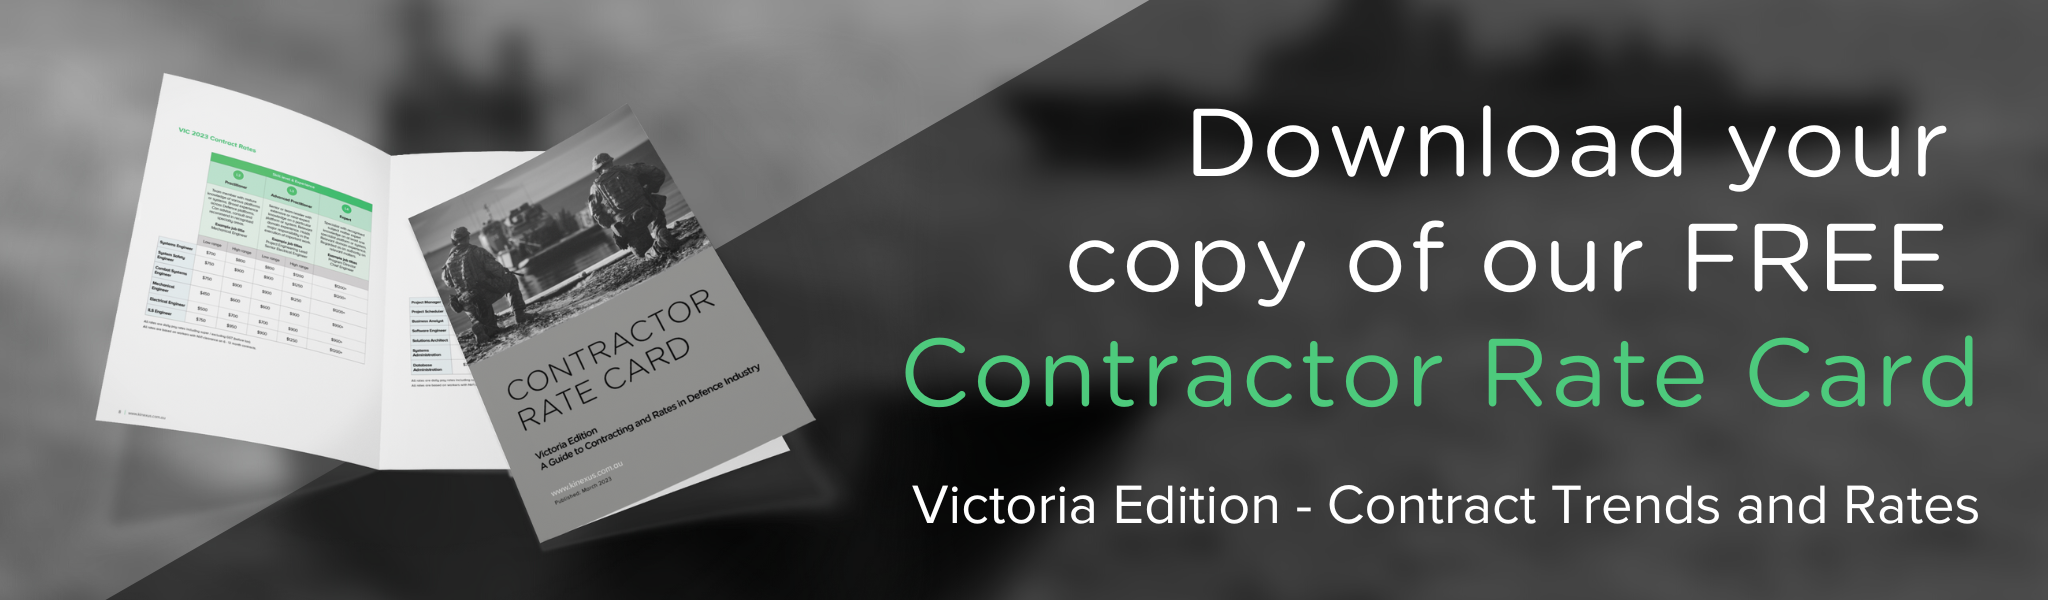 Download our Contractor Rate Card now